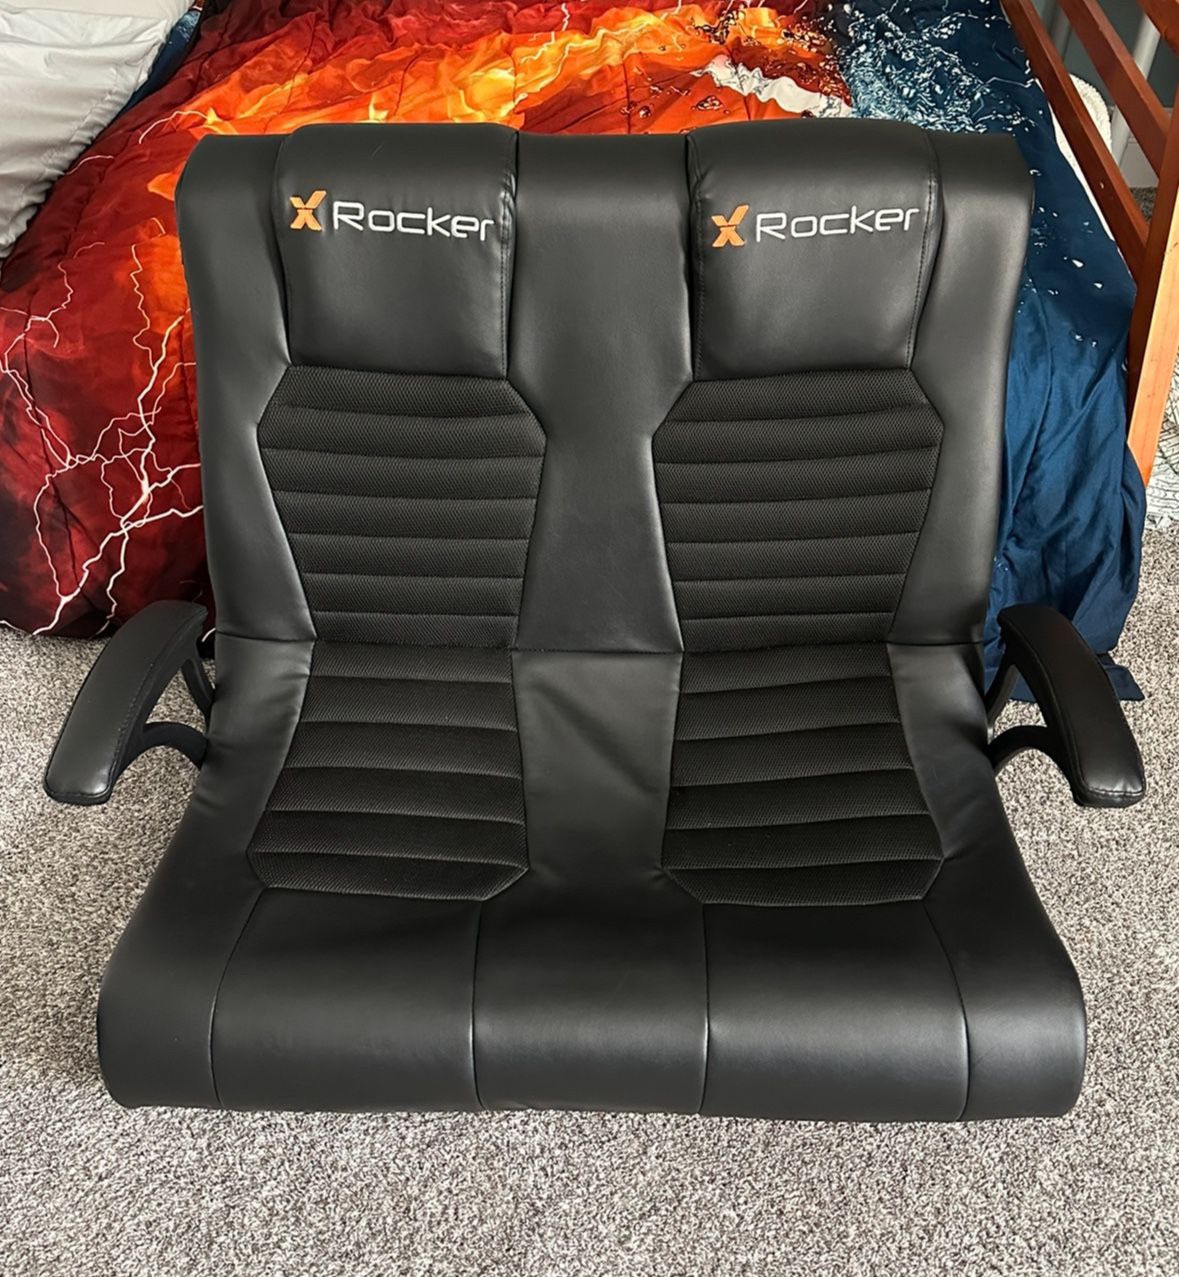 Gaming Chair X Rocker Dual Commander Floor Rocking Couch XL Duel Double Set Chairs Speakers & Subwoofer PC XBOX ONE Series X PS4 Nintendo Switch PS5 